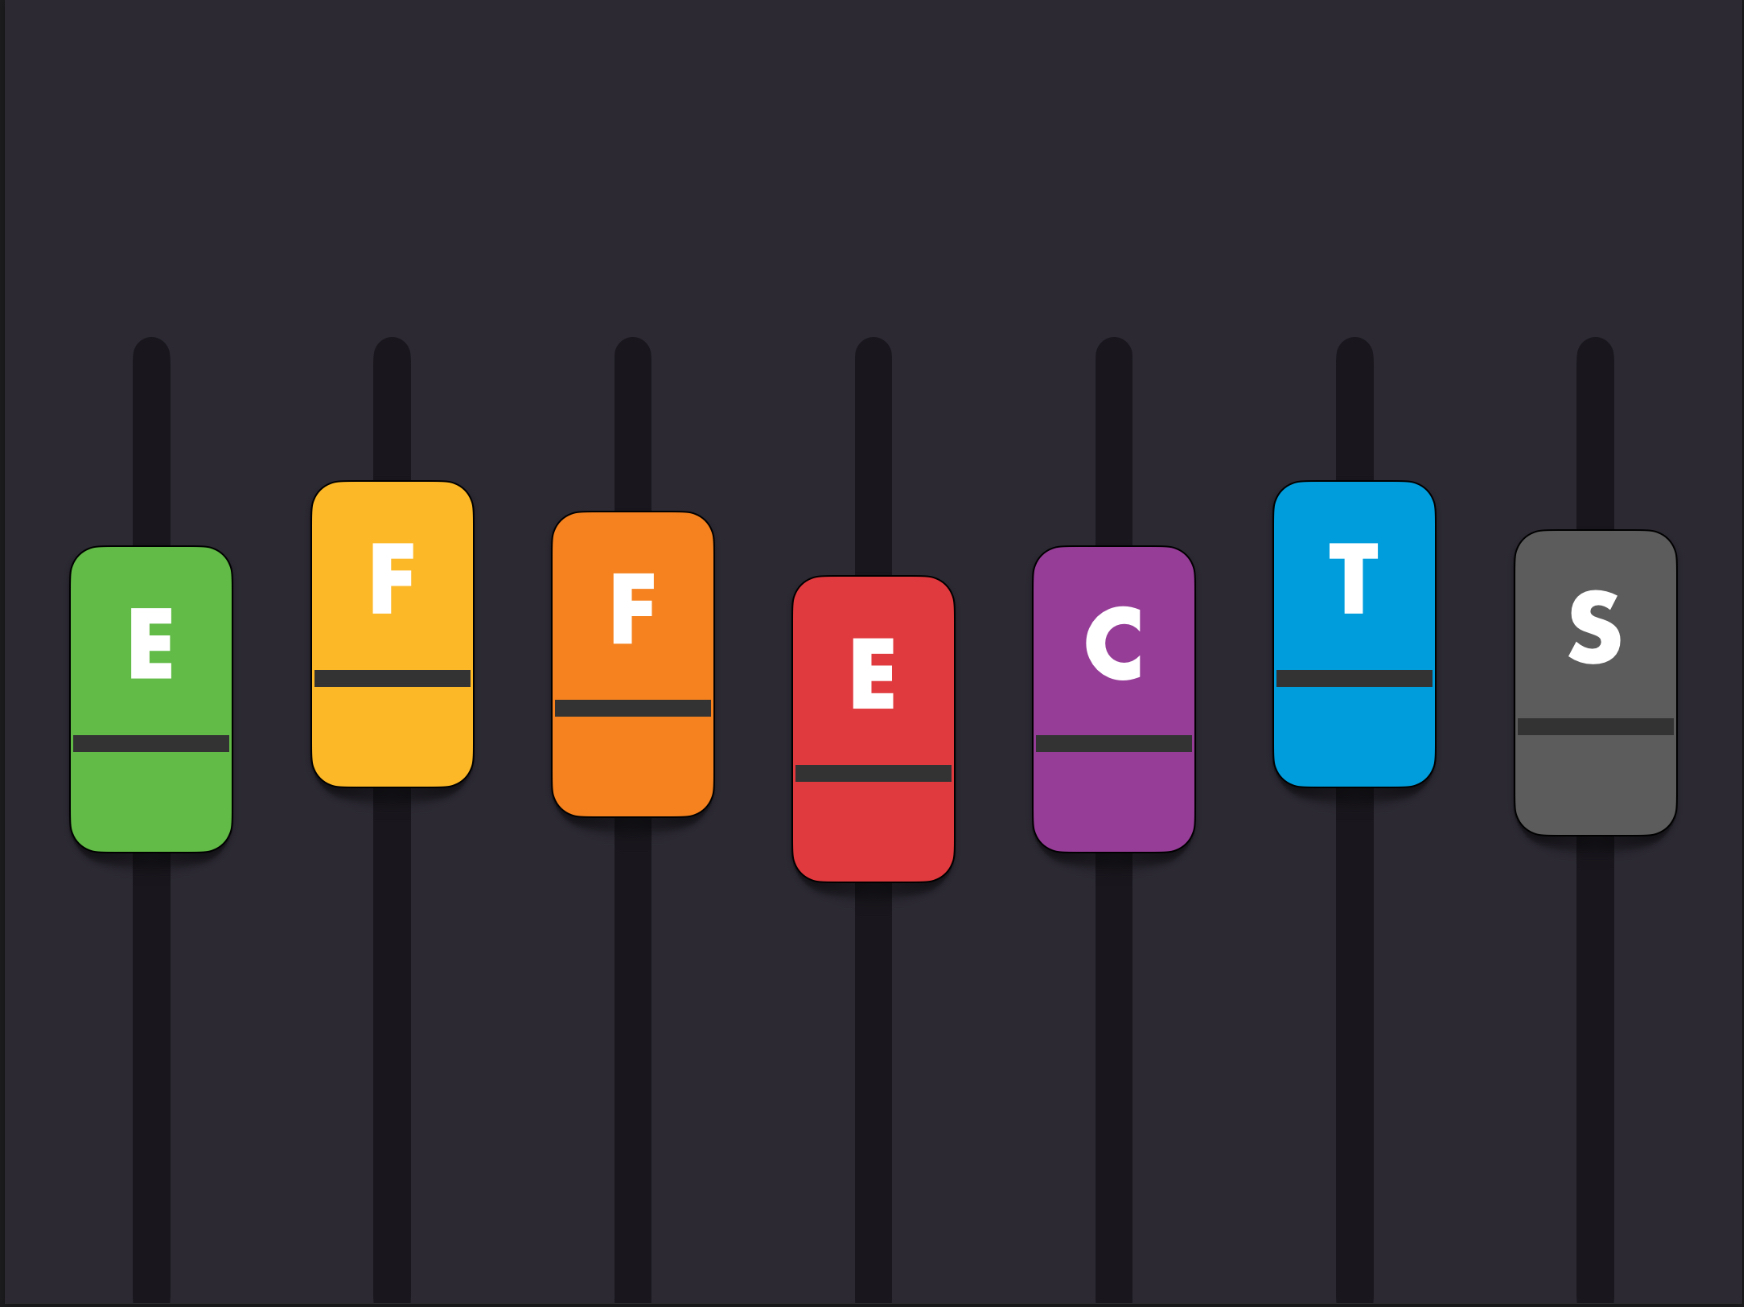 Effects journal cover. The individual letters of the word ‘Effects’ are placed within coloured mixing desk faders.